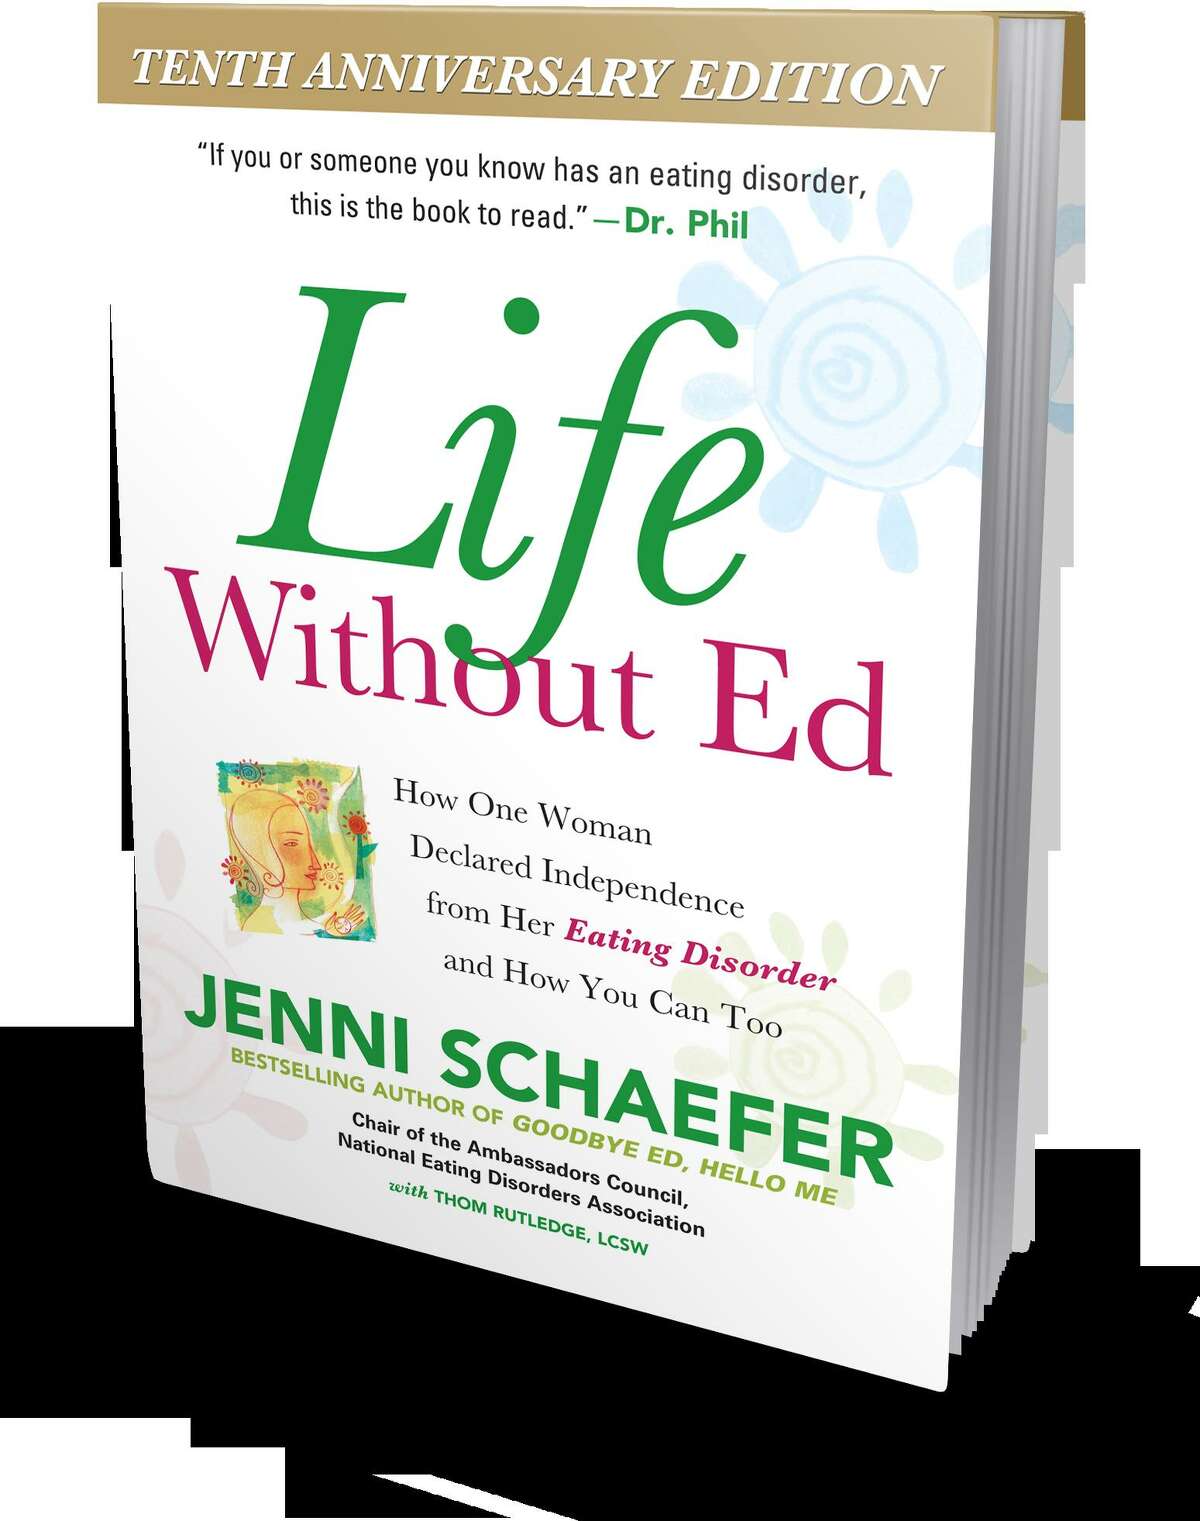 "Life Without Ed: How One Woman Declared Independence from Her Eating Disorder and How You Can Too," by Jenni Schaefer